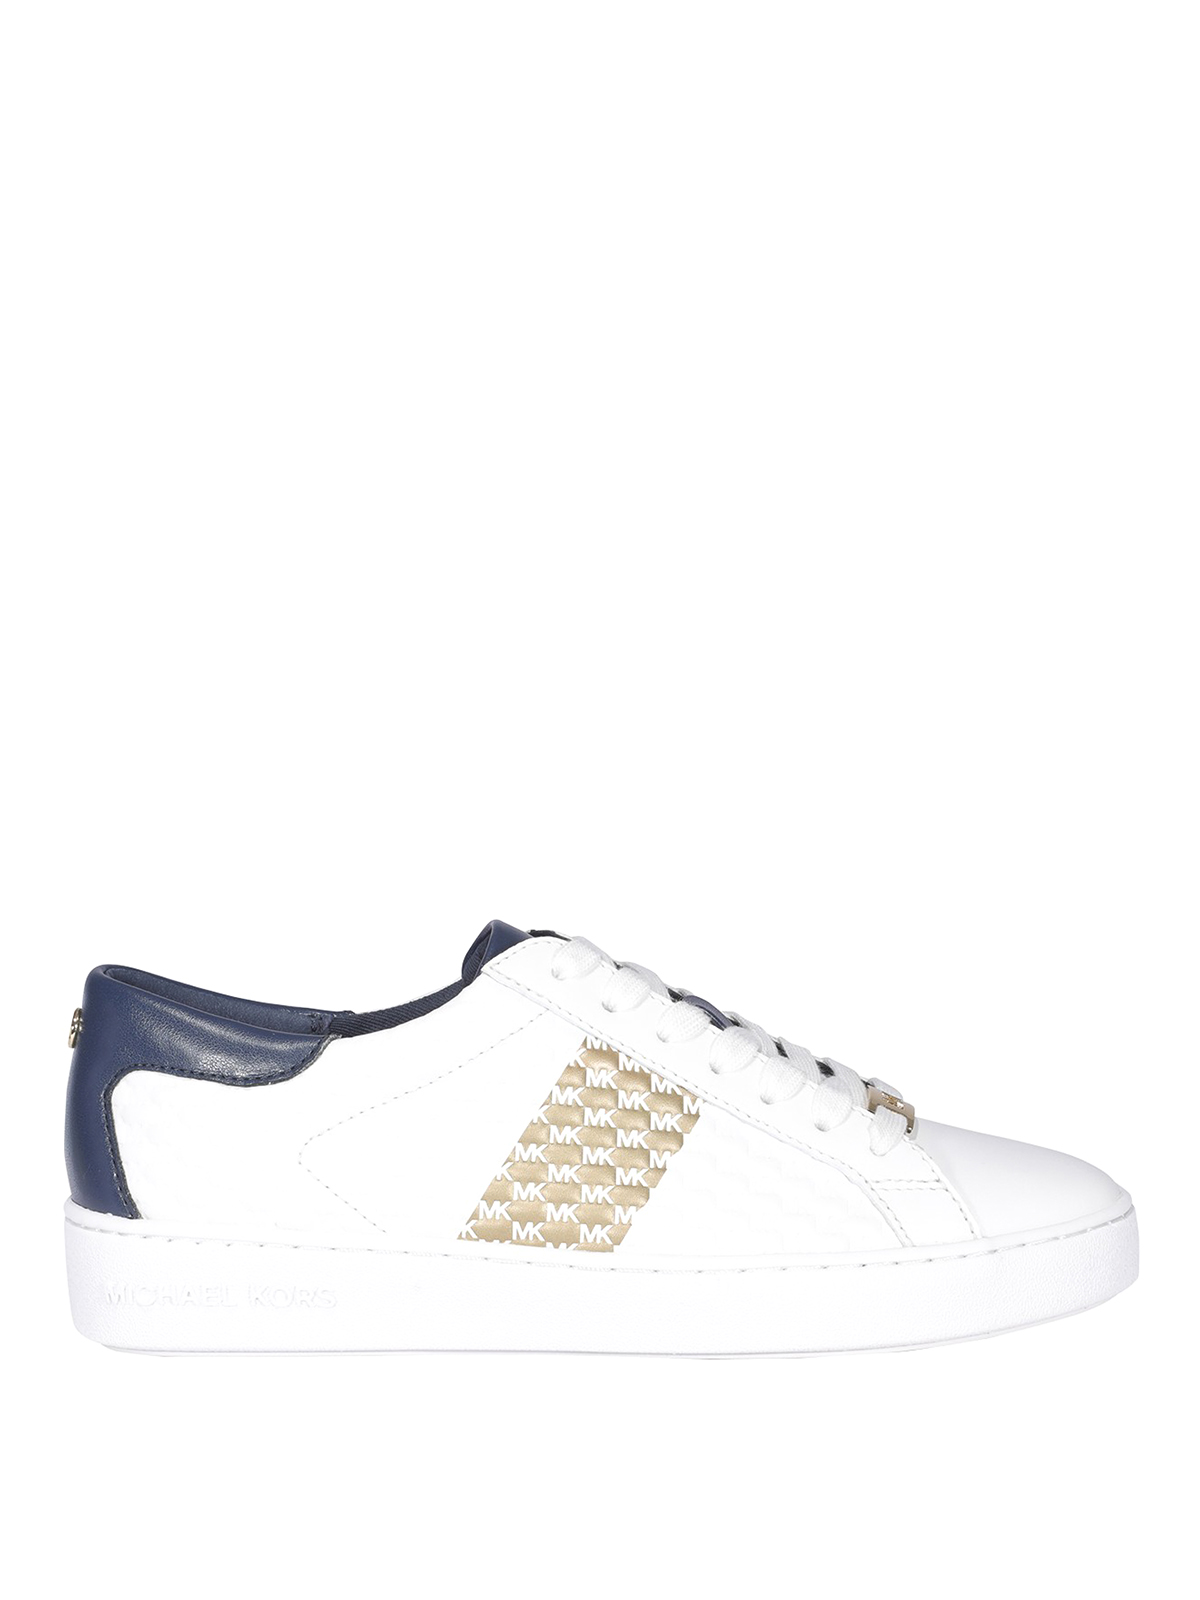 Trainers Michael Kors - Colby sneakers - 43S1COFS3L406 